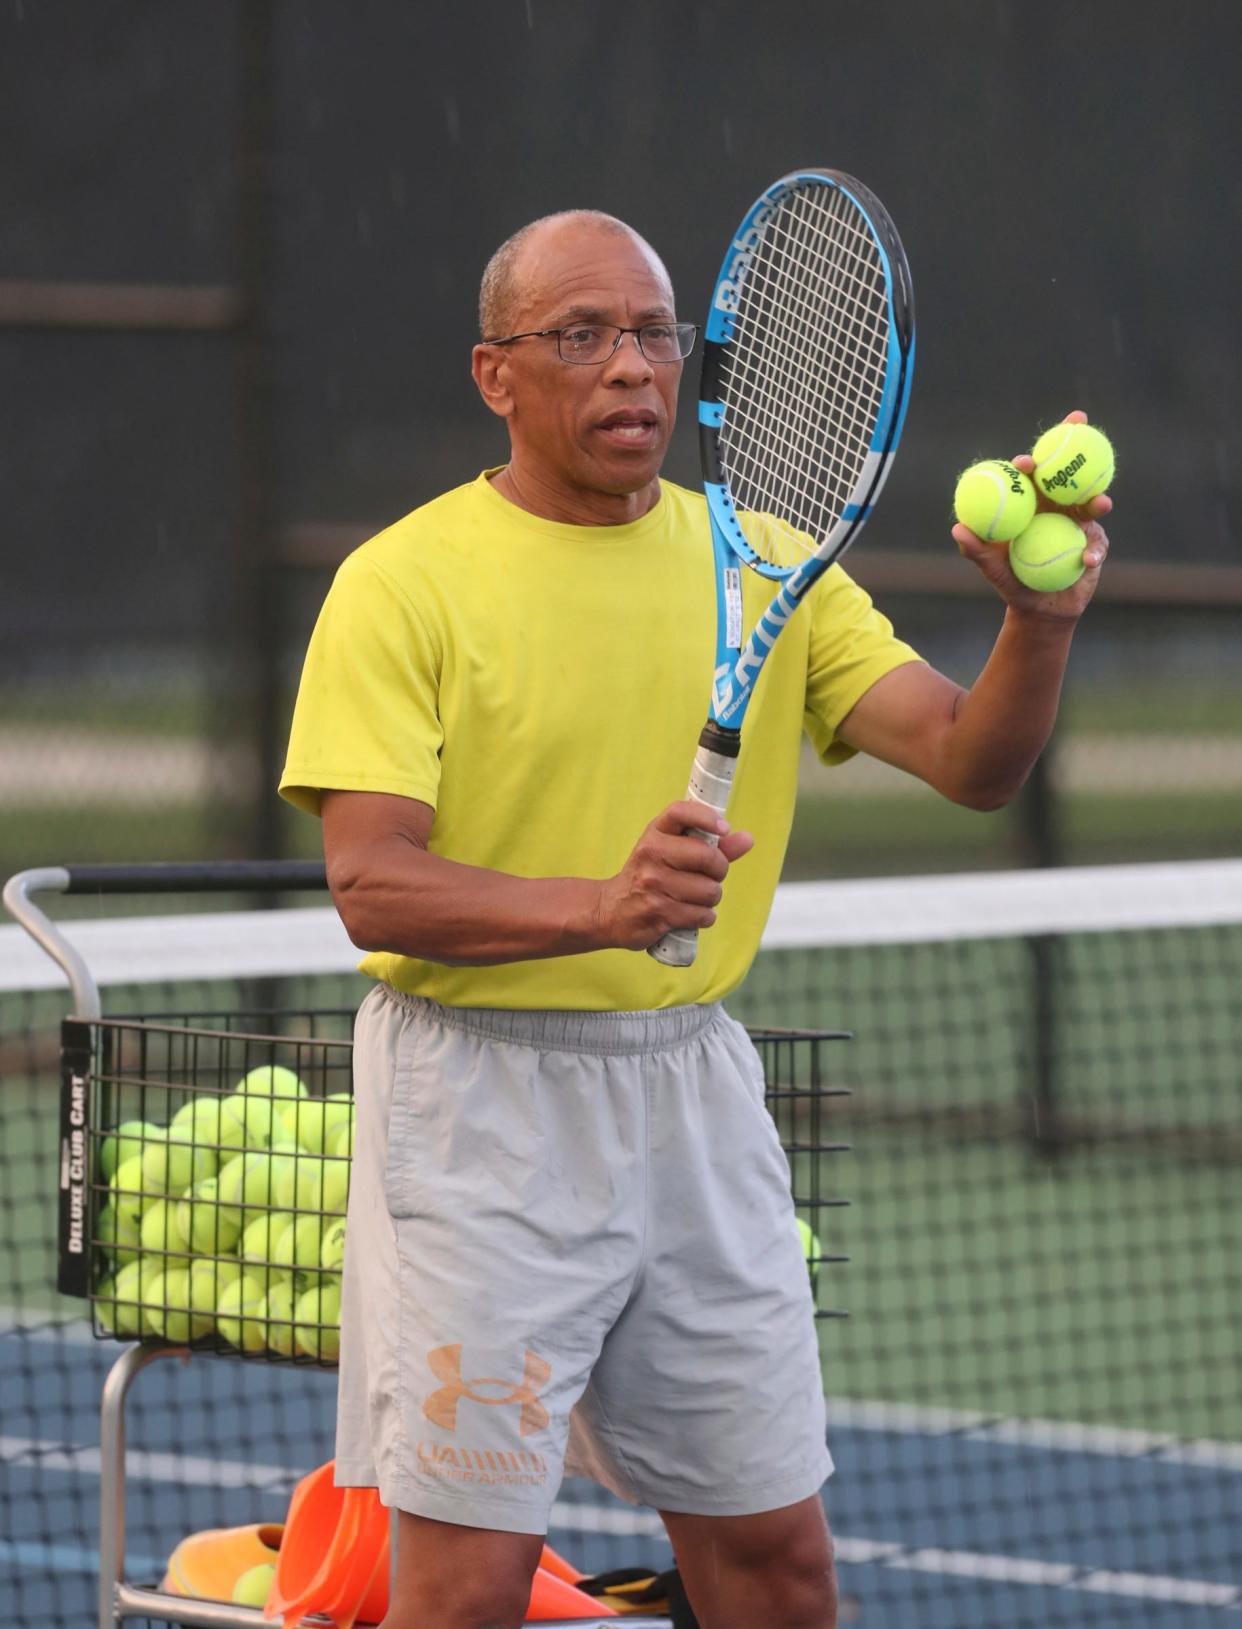 Jeff Collins gives tennis lessons to a small group of adults at the Palmer Park courts in Detroit on Aug. 18, 2022. Collins is using teaching tennis as a way to celebrate his late wife of 36 years, Lois Collins.